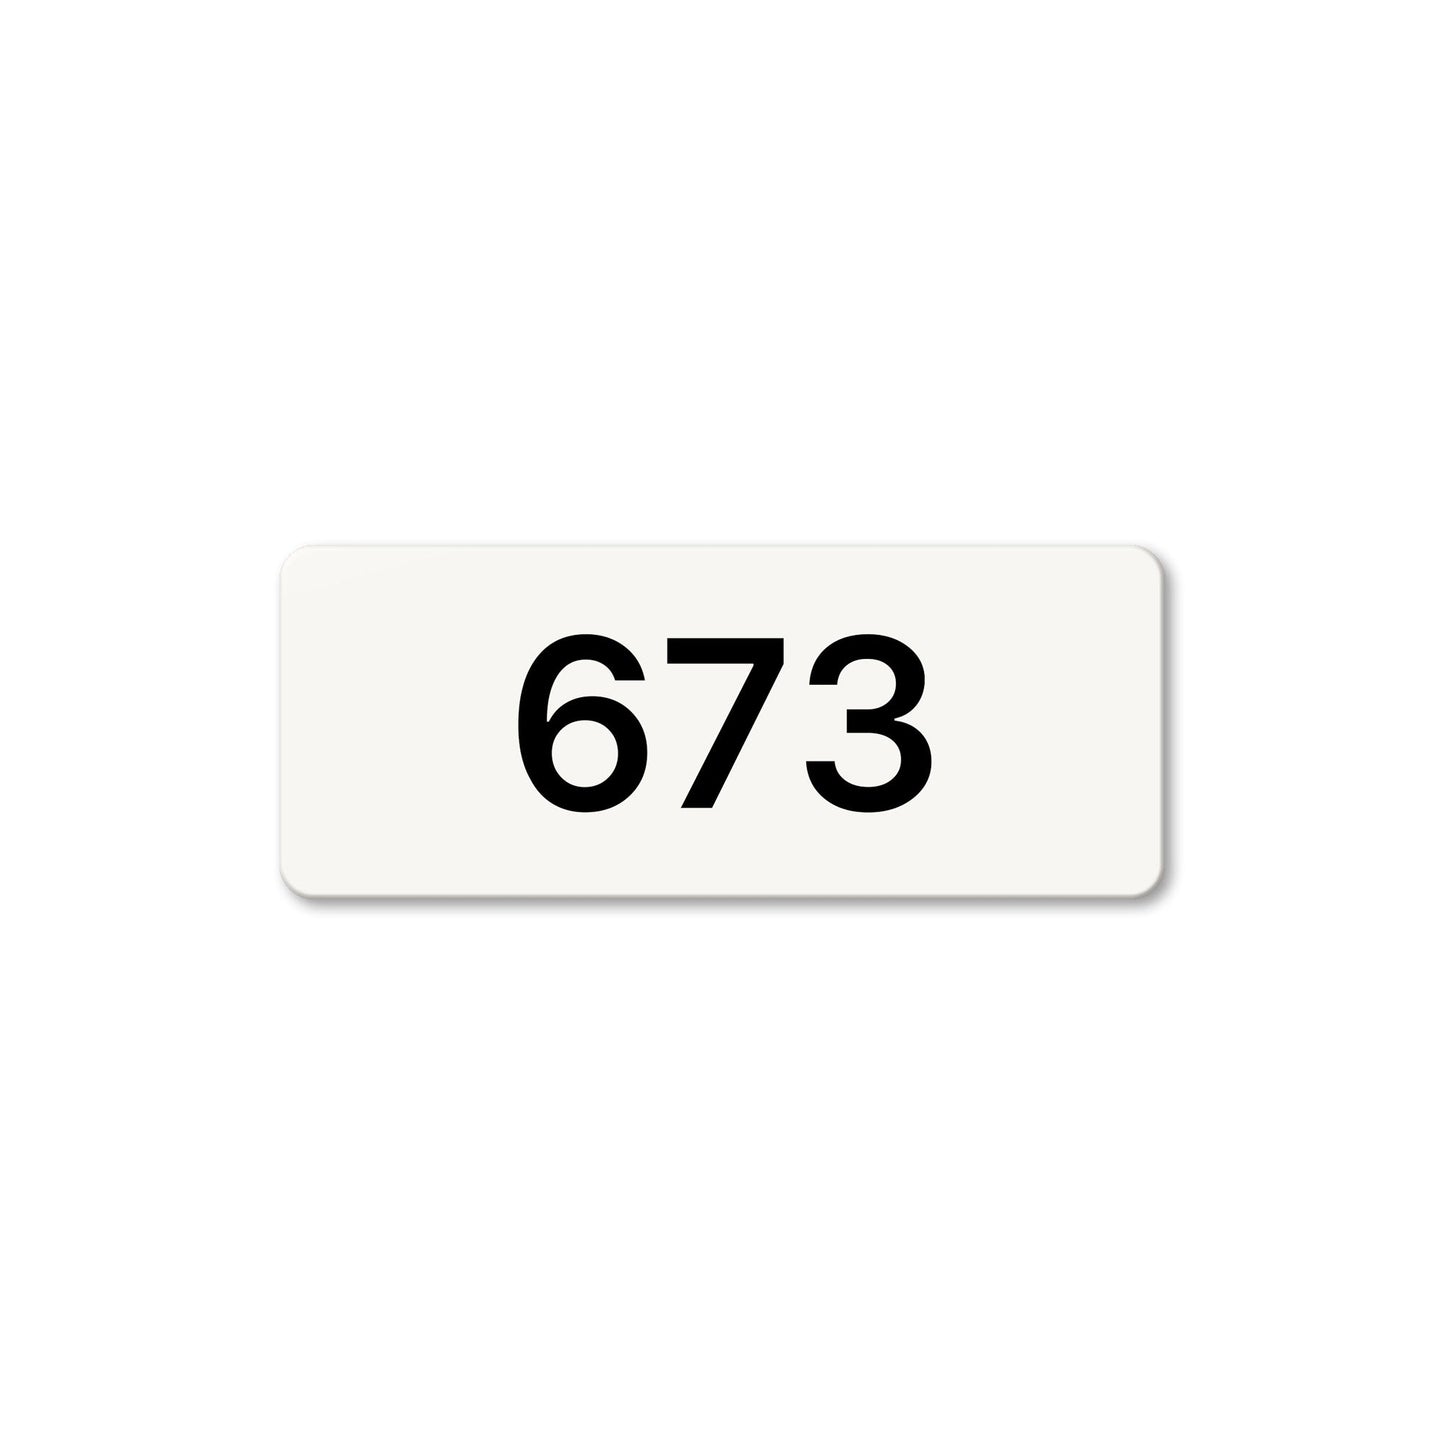 Numeral 673